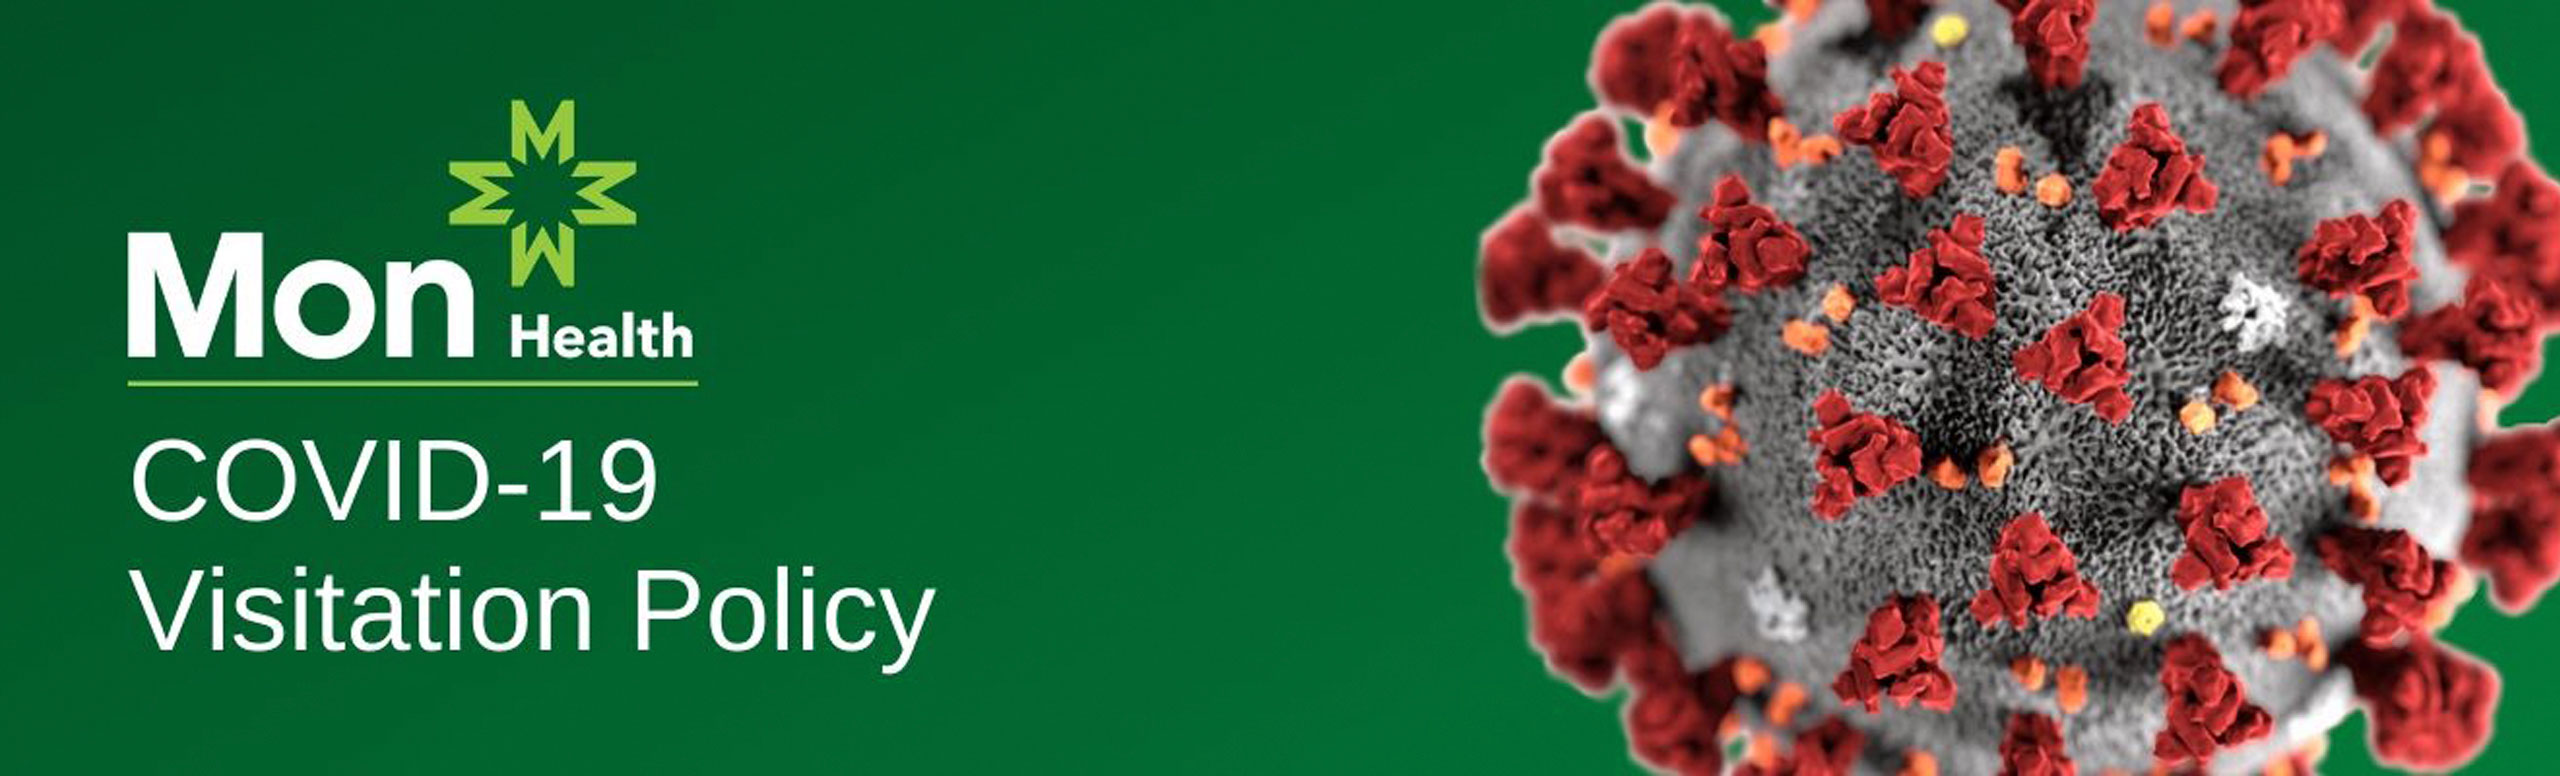 Banner picture of the coronavirus. Banner says: Health Covid - 19 Visitation Policy